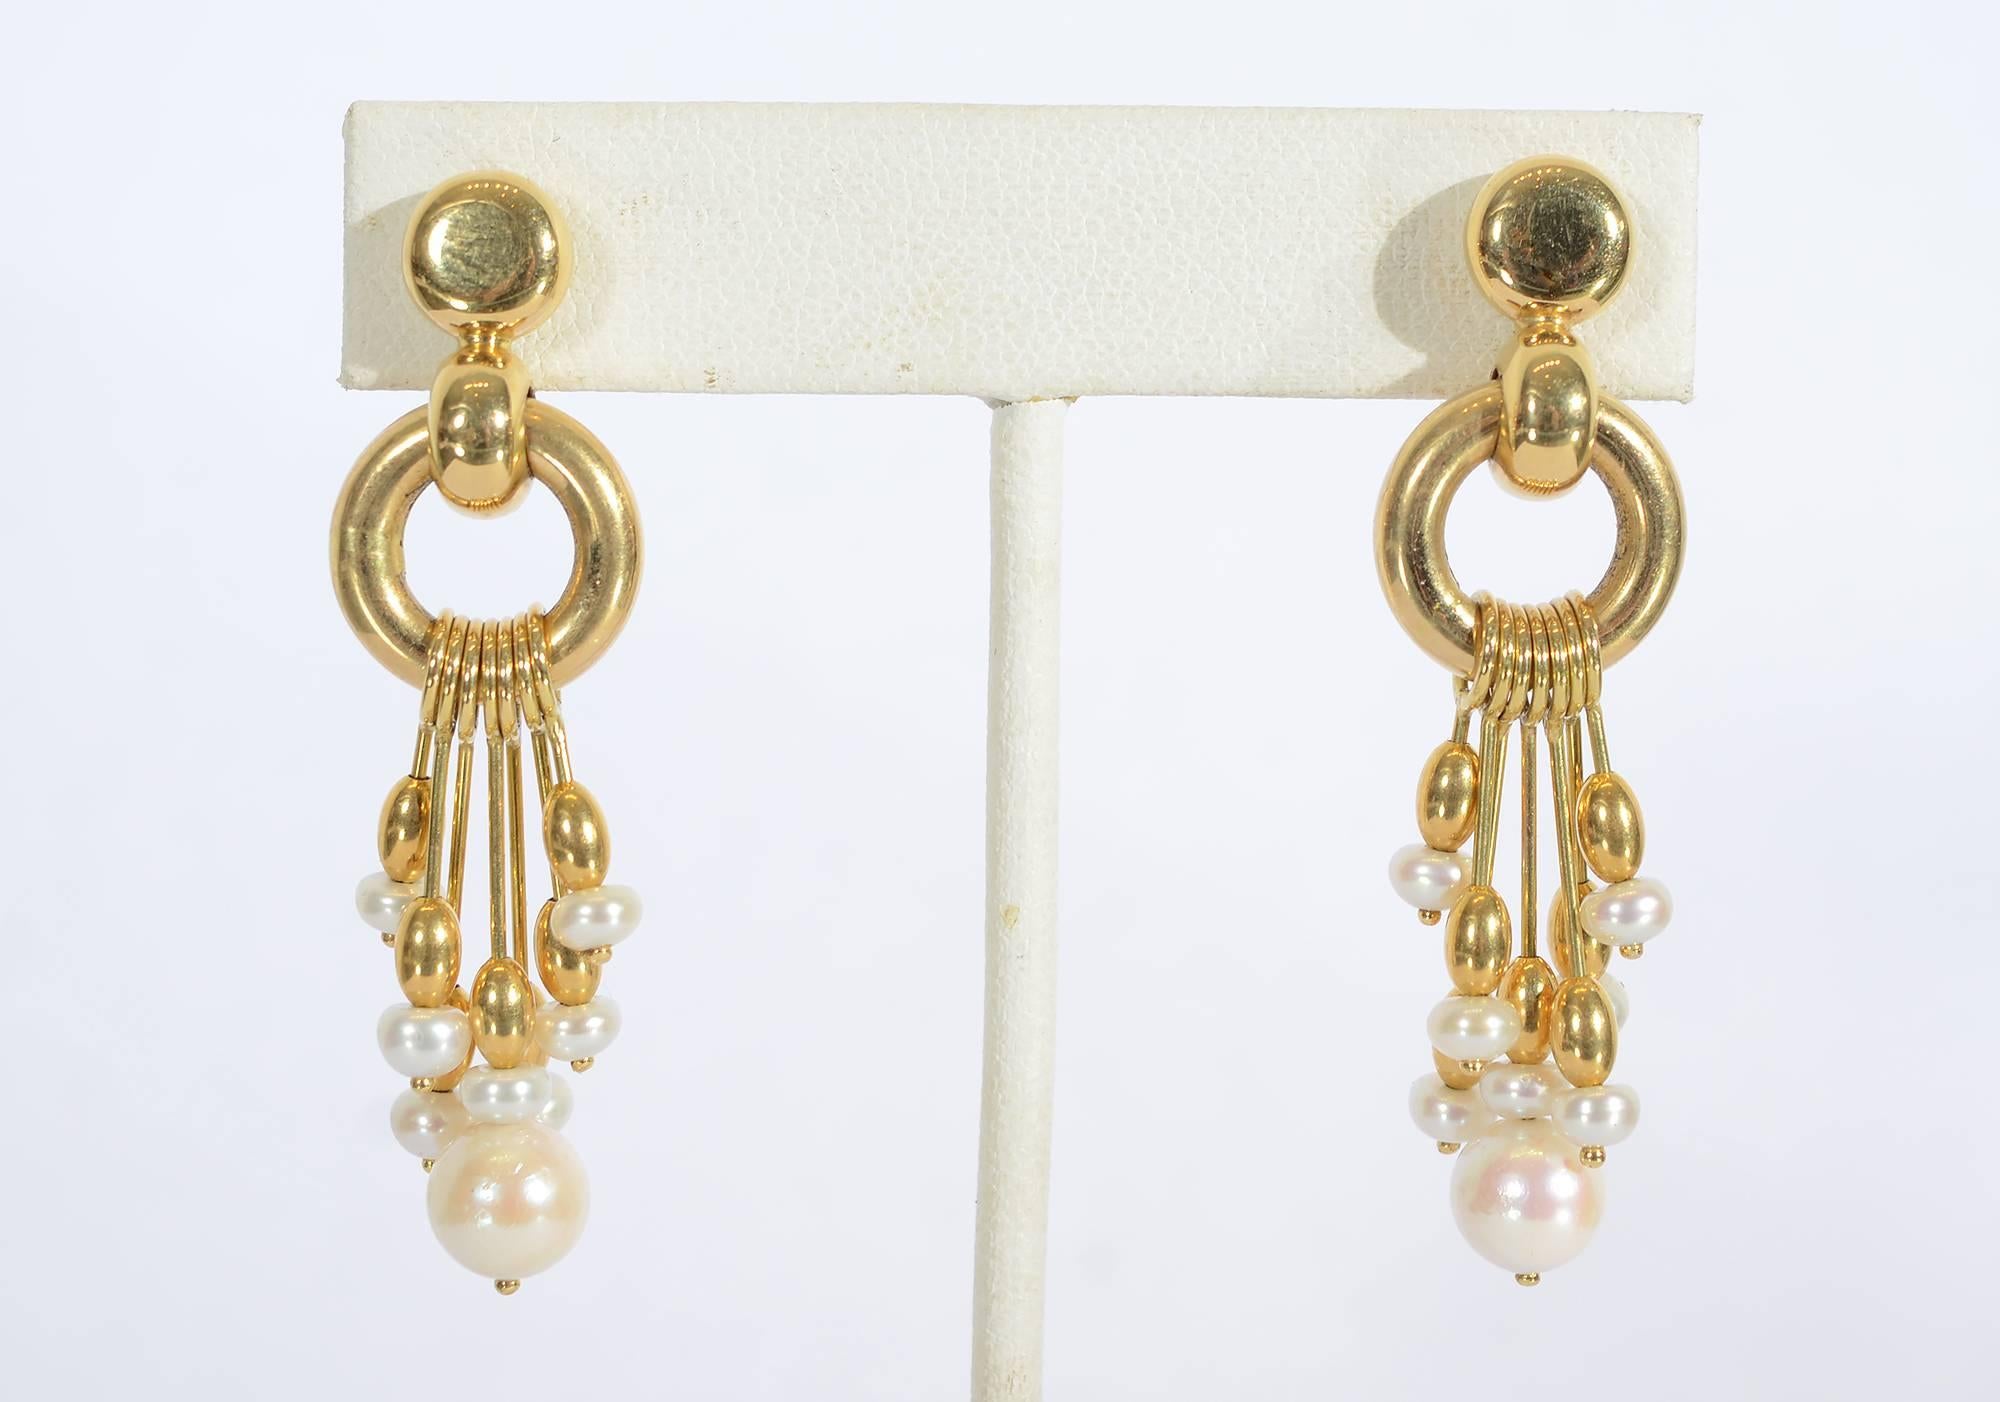 Pearls are suspended on spokes in these unusual dangle earrings. A gold circle 1/2